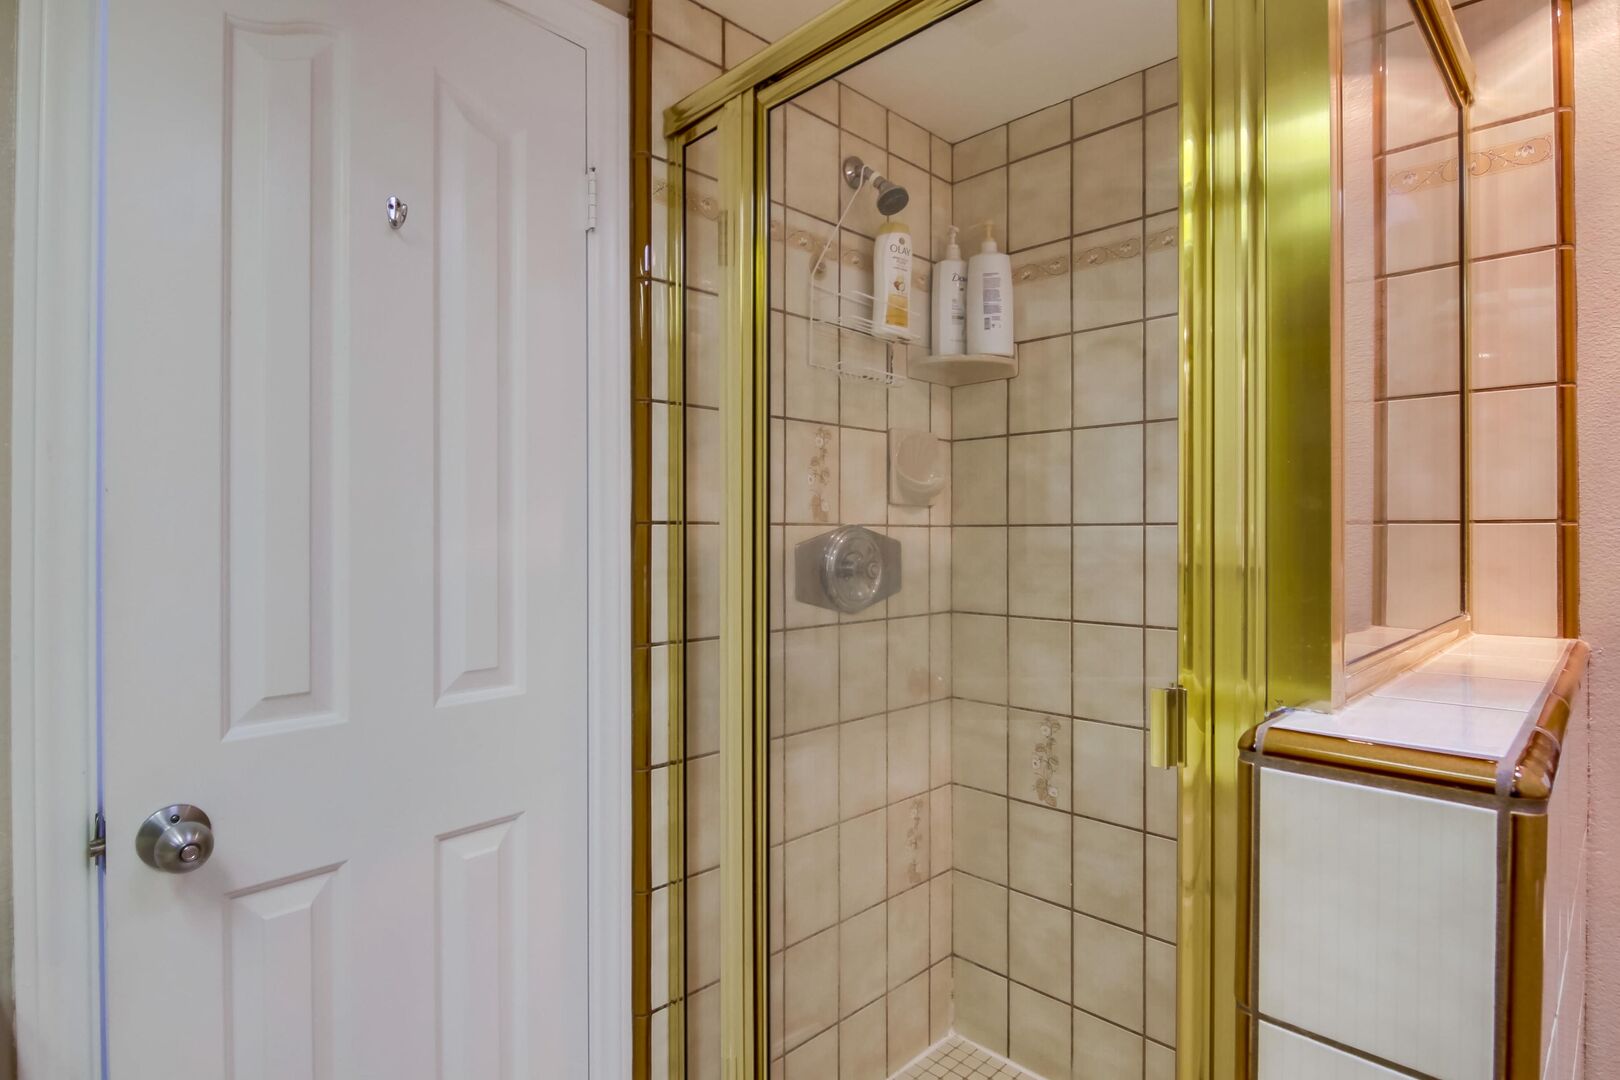 Upstairs bathroom with shower